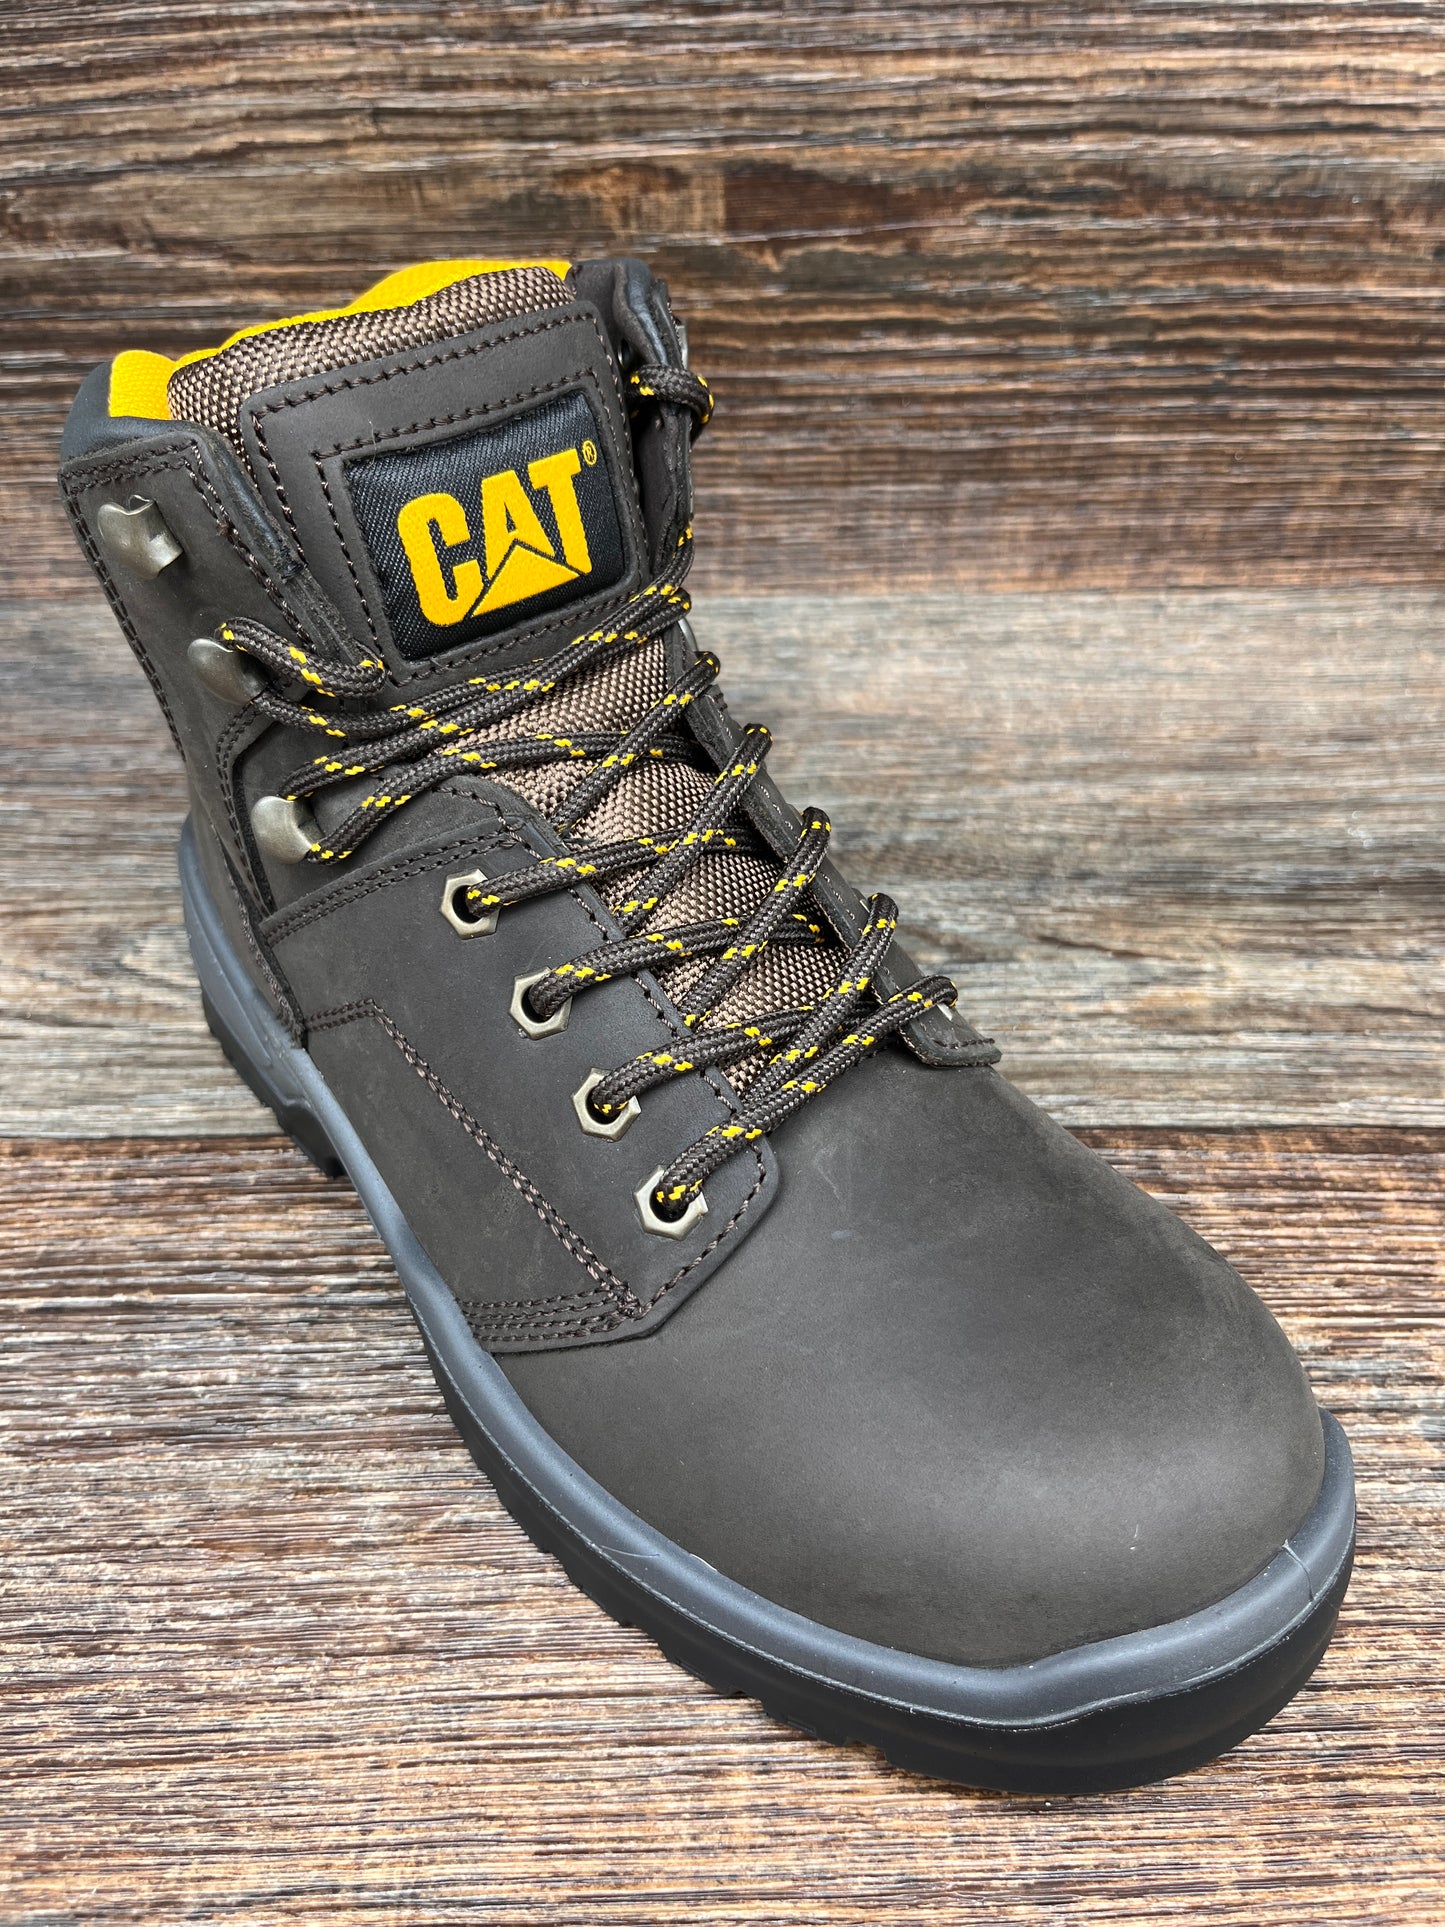 p91672 Men's Striver Lace Up Steel Toe Work Boot by Caterpillar